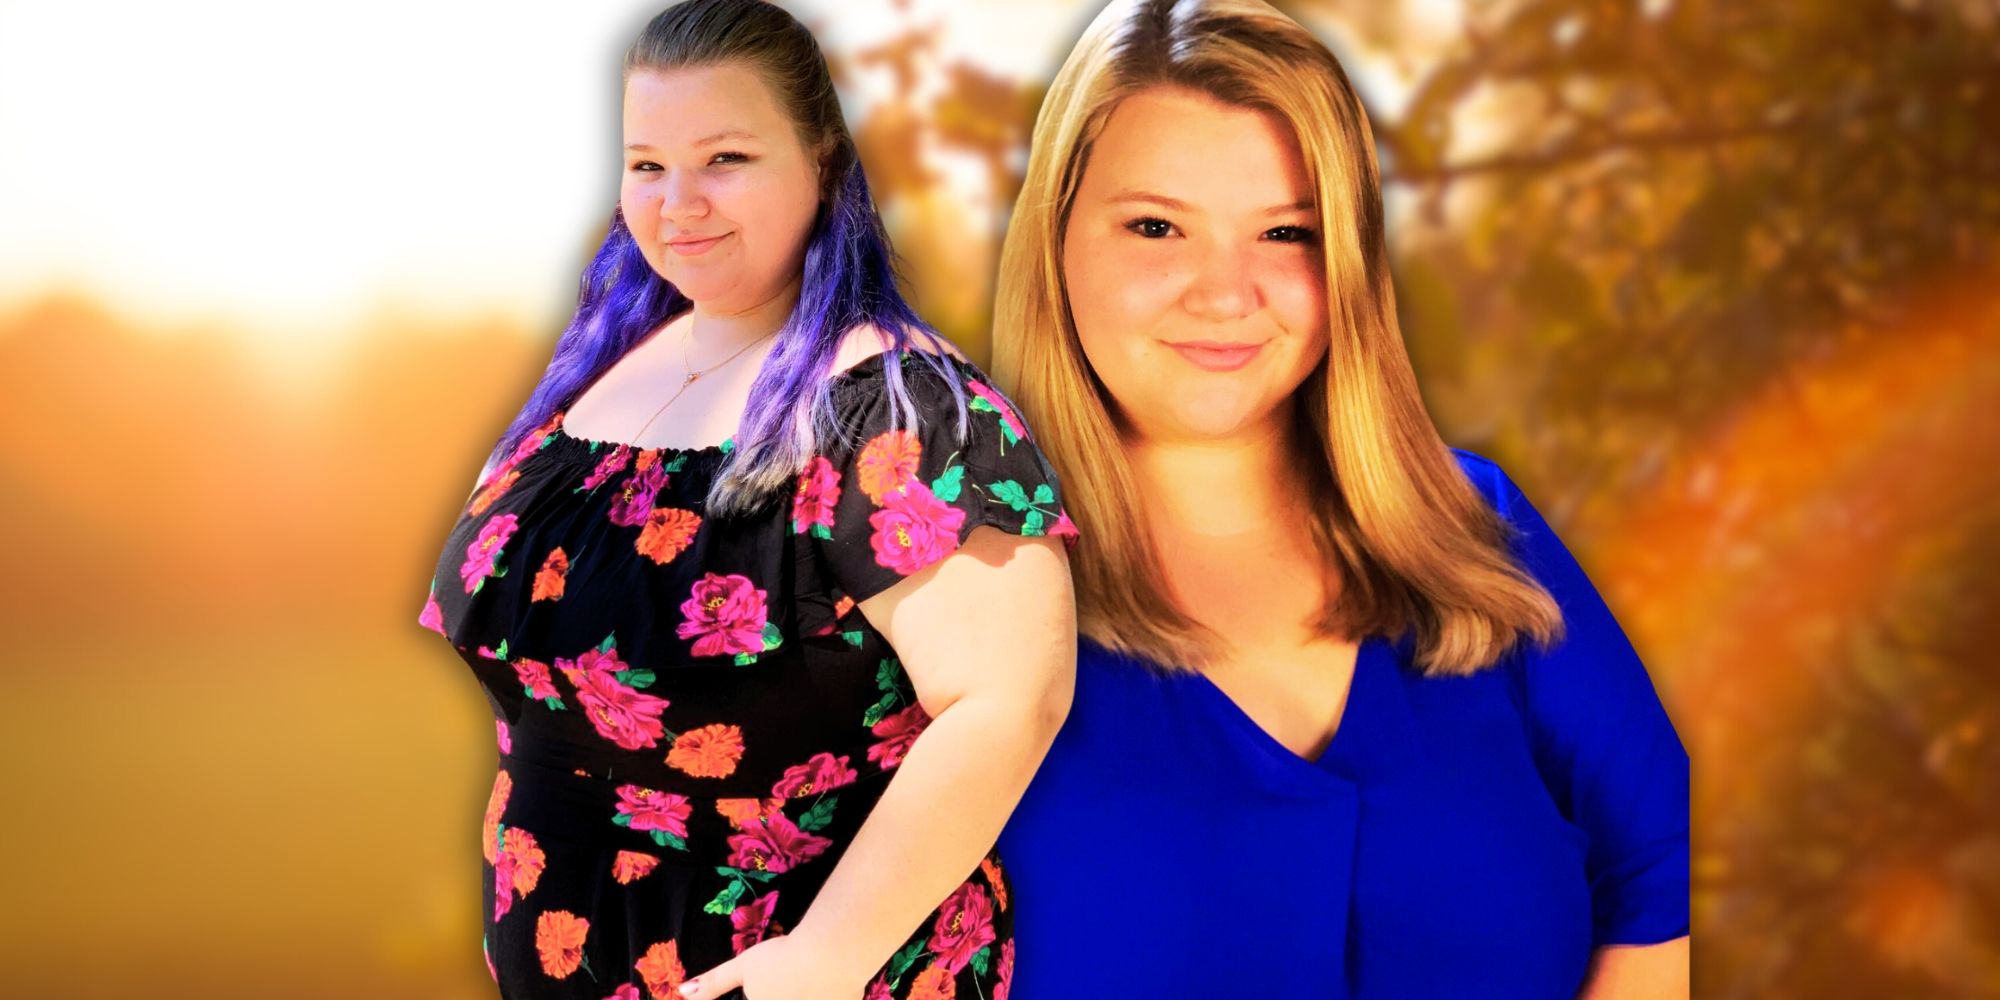 90 Day Fiancé's Nicole Nafziger in two different outfits with orange background